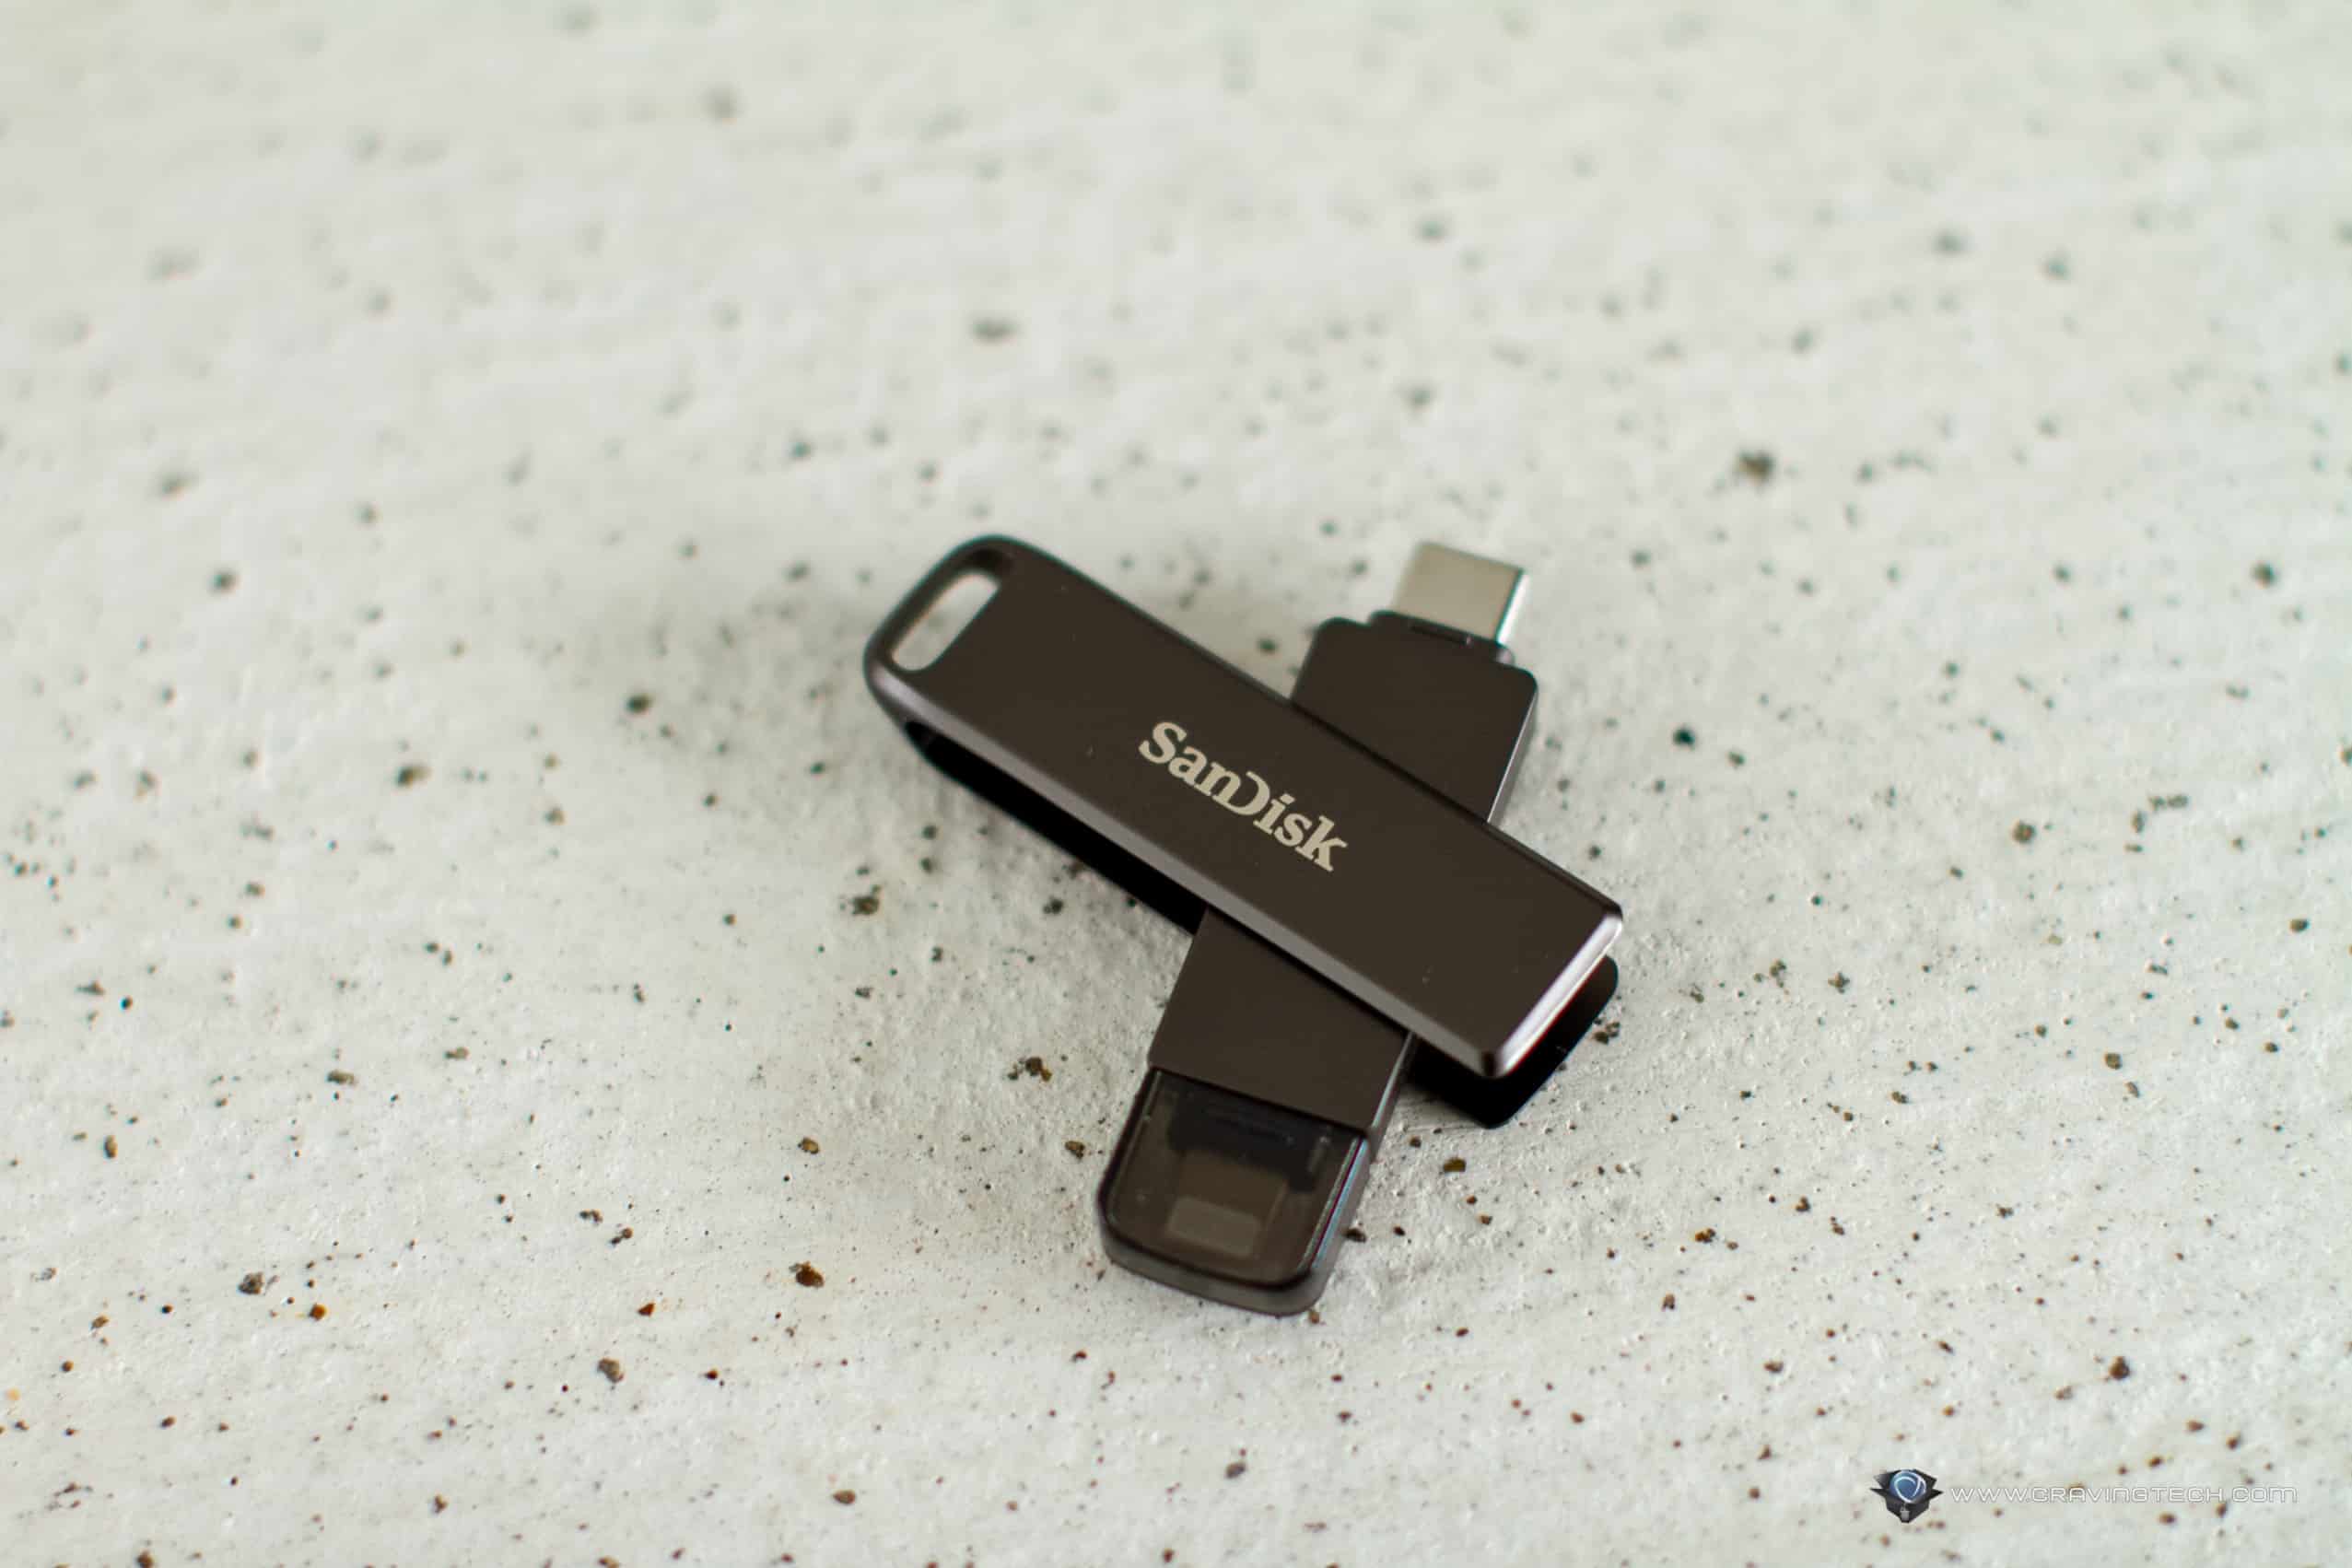 Backup your iPhone photos and videos with this slim USB drive